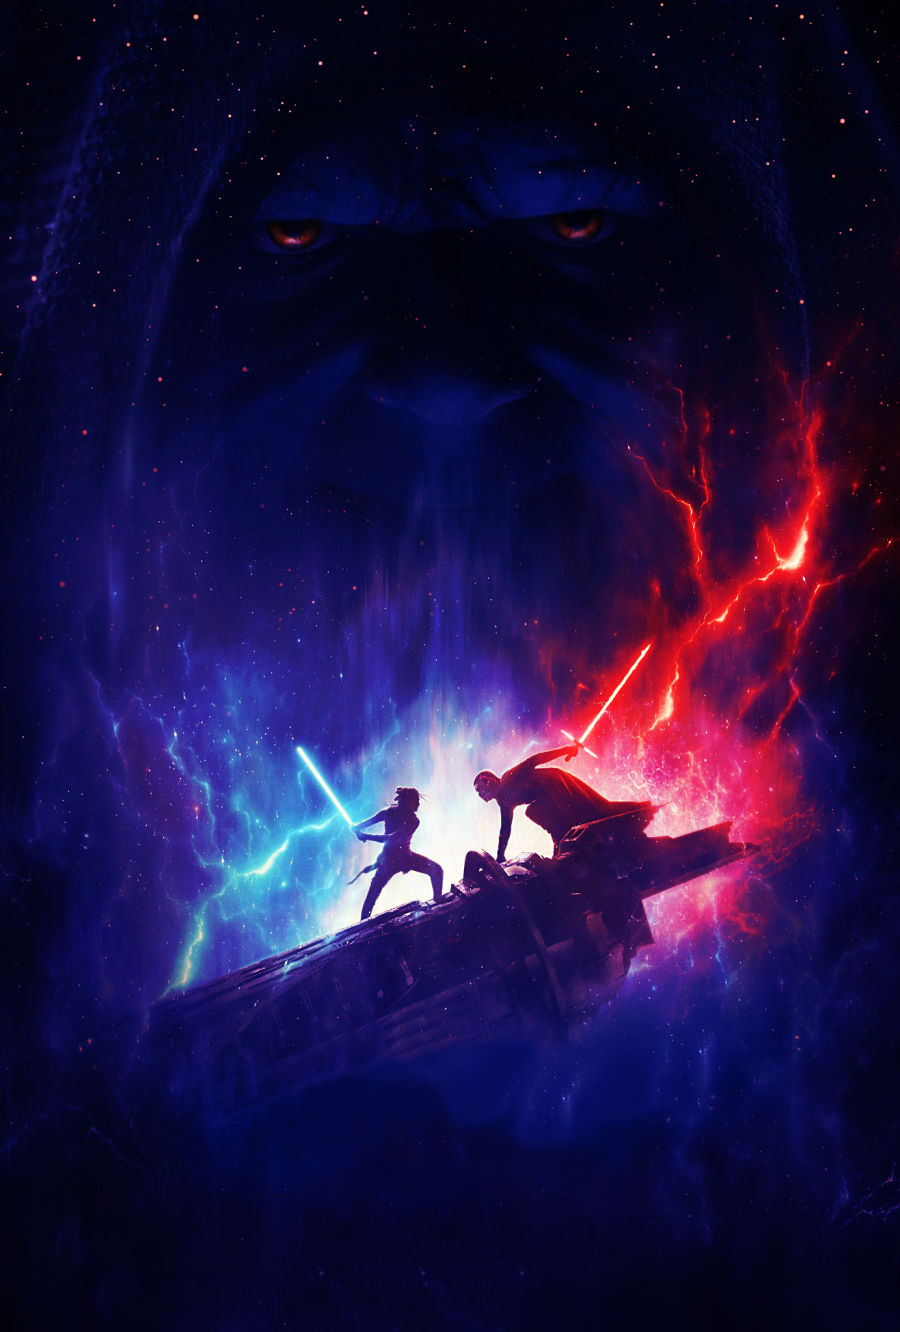 THE RISE OF SKYWALKER D23 POSTER TEXTLESS EDIT.png